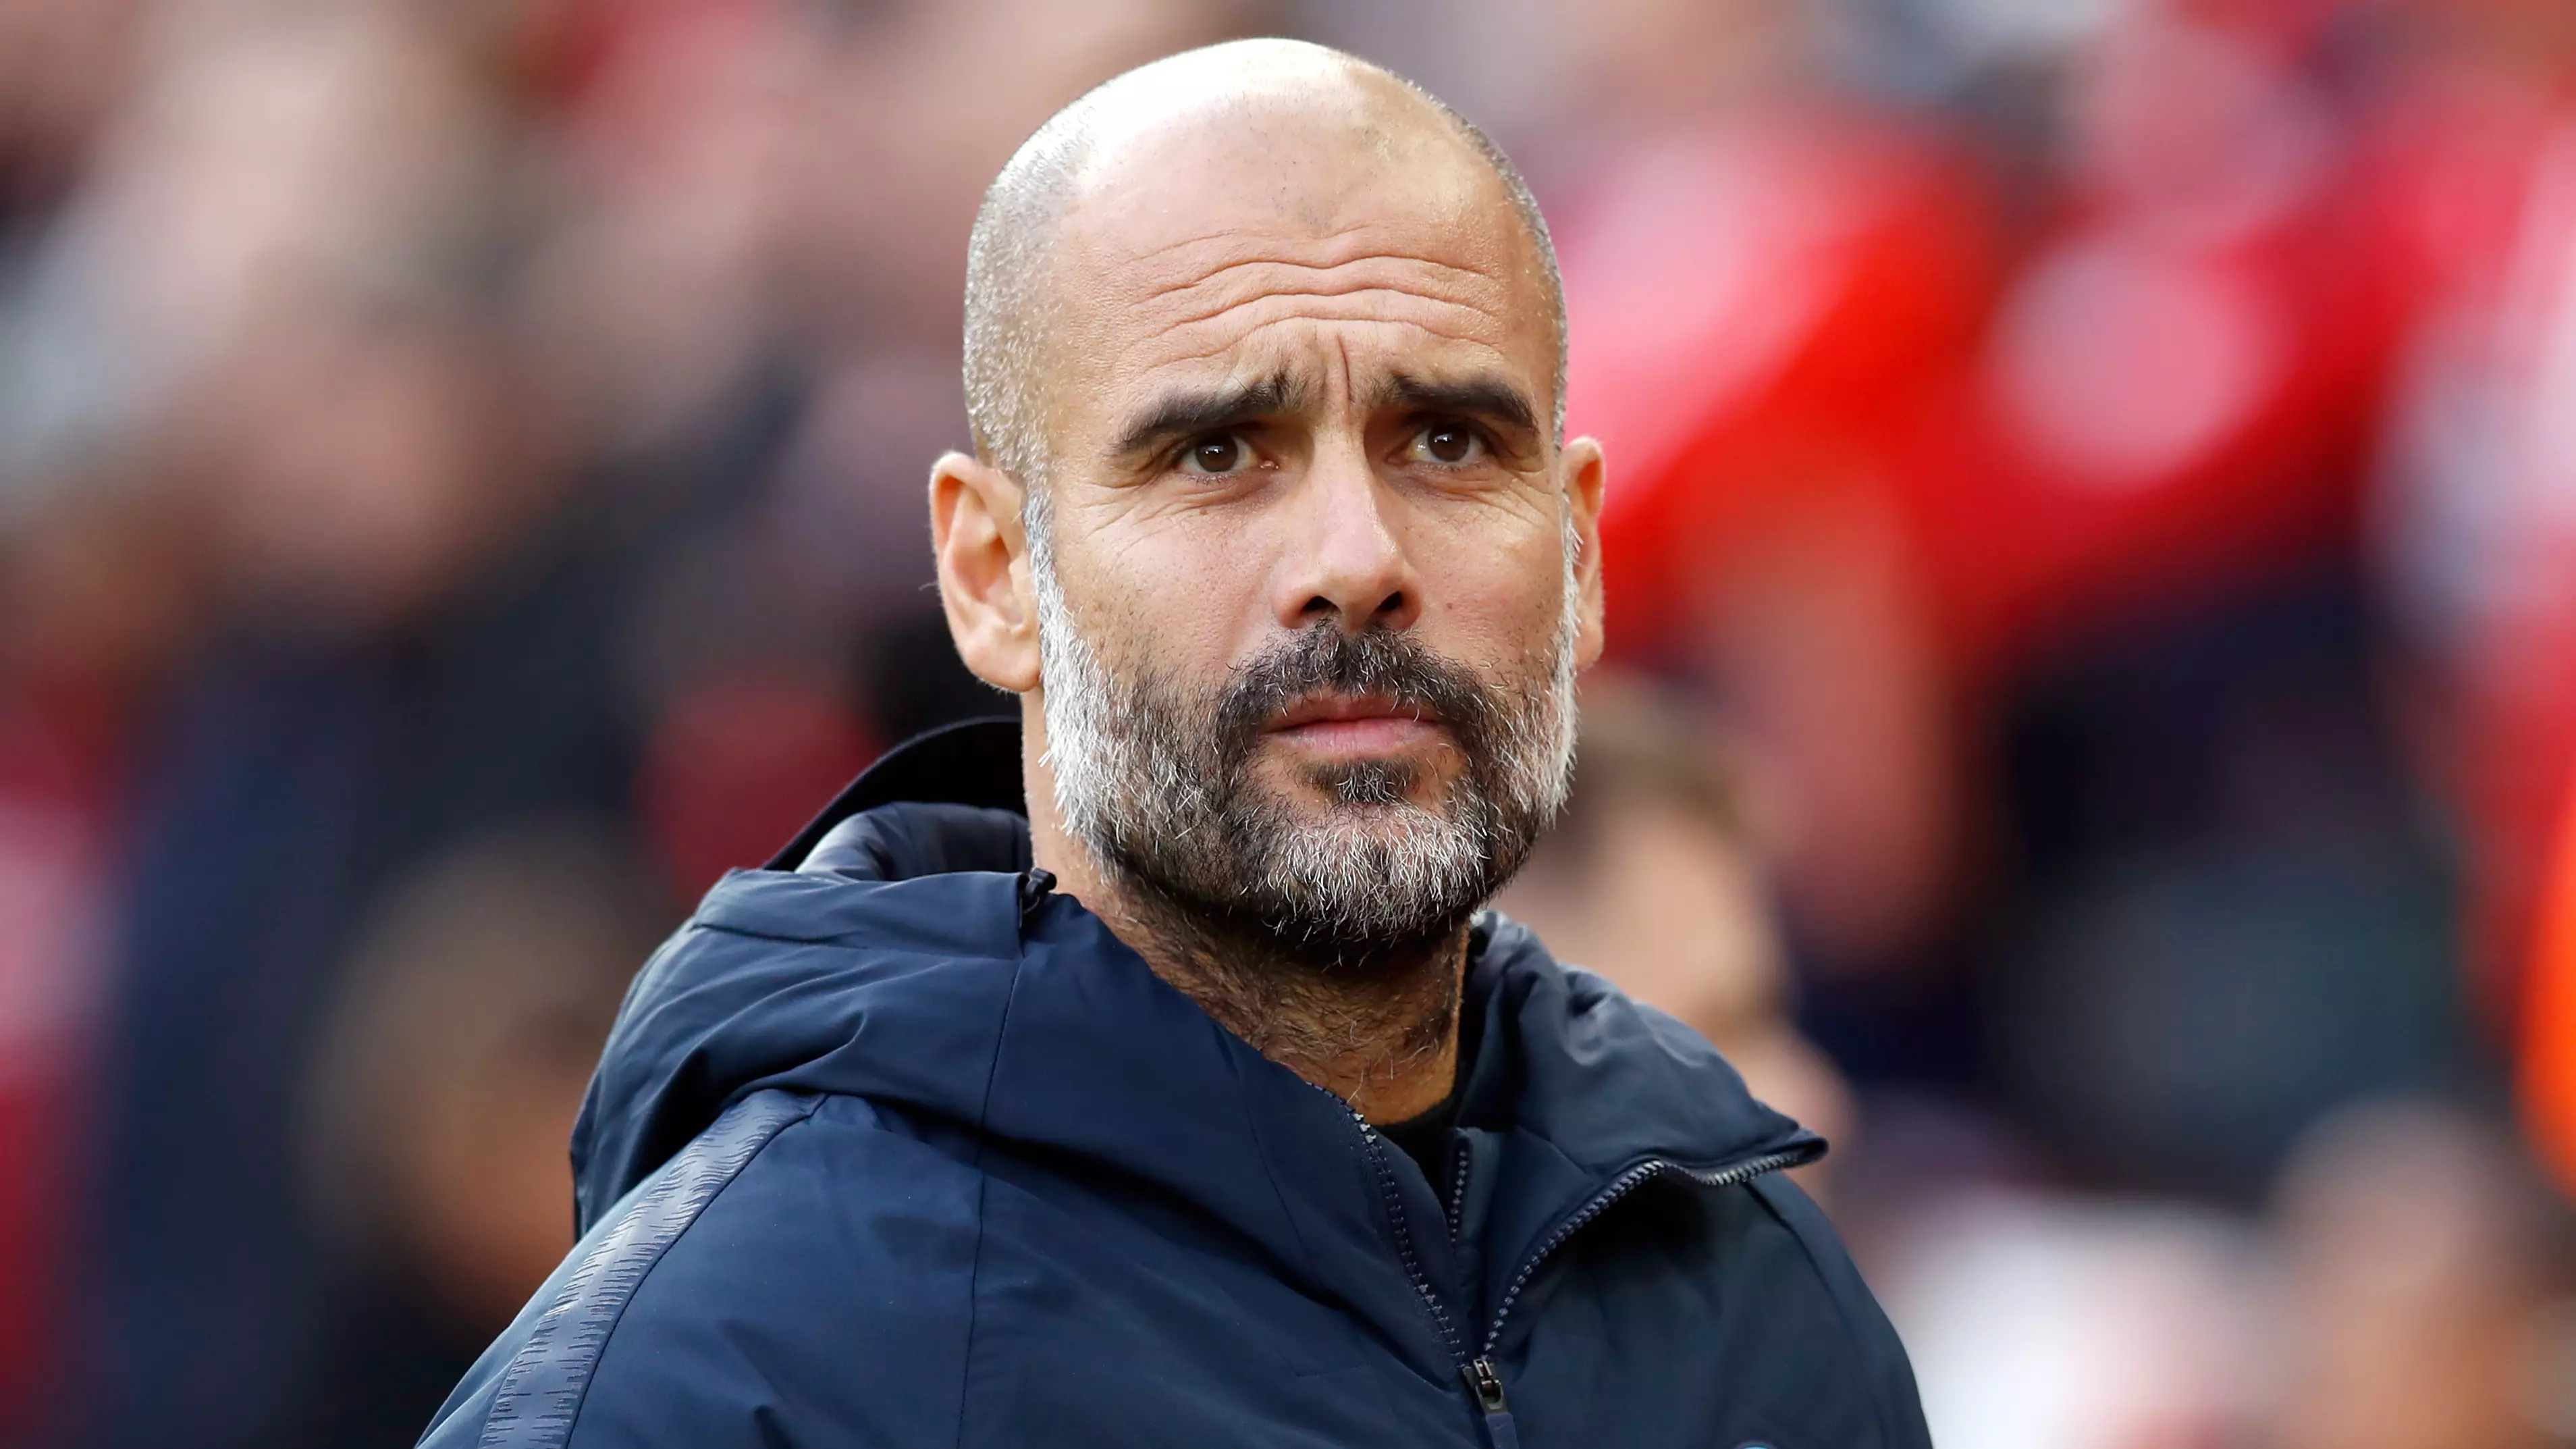 Pep Guardiola Reveals Wife And Children Were Caught In Manchester Arena Attack